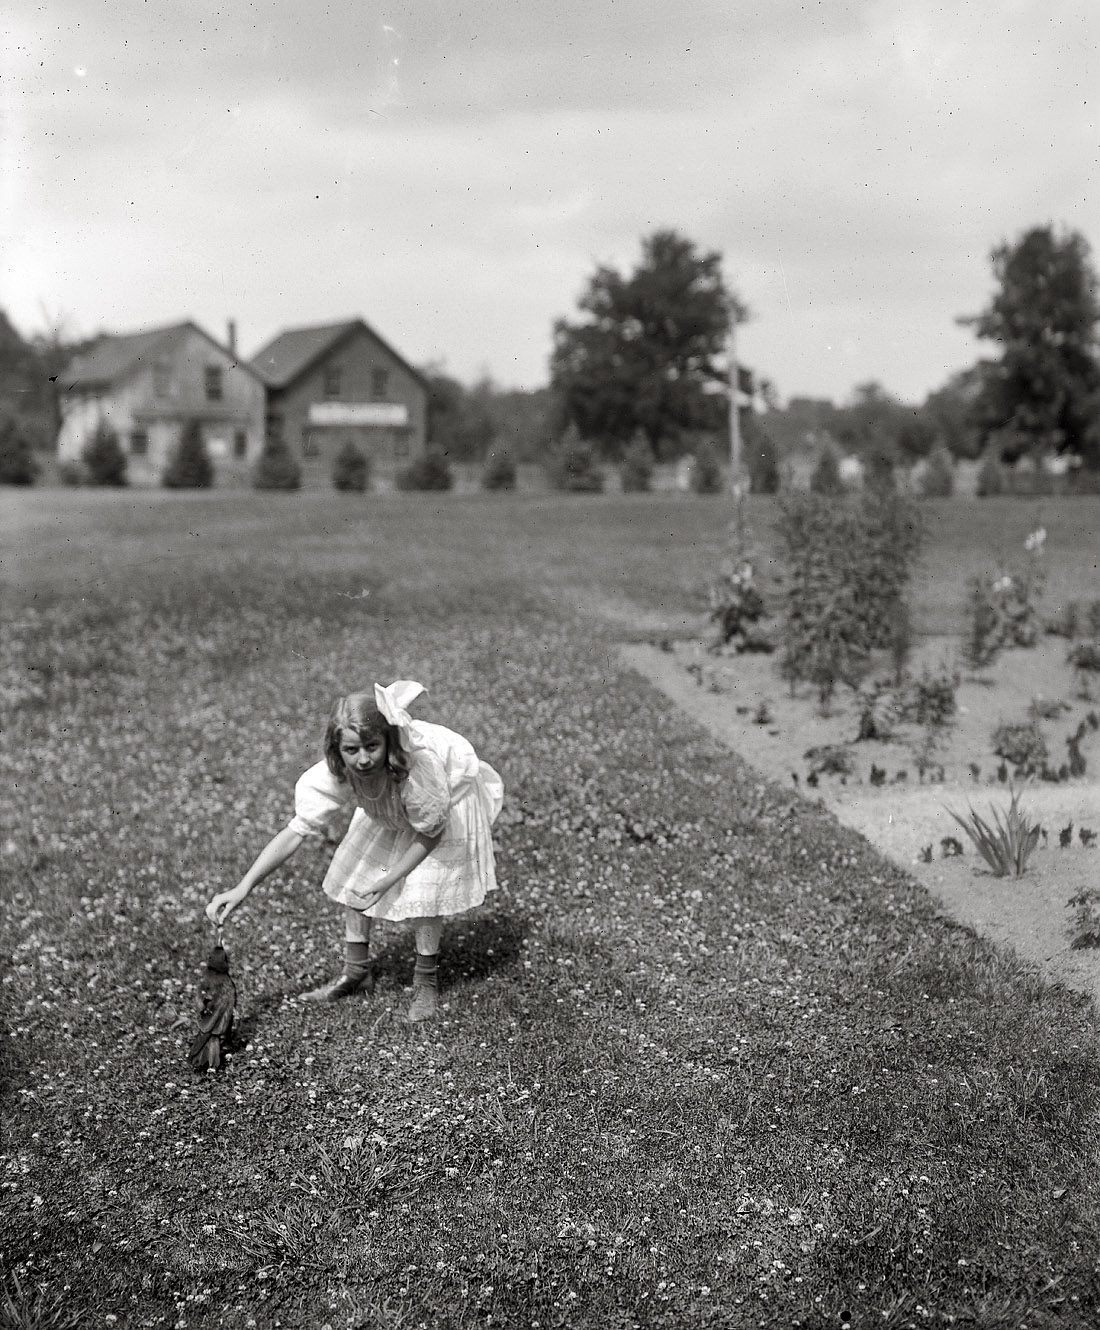 Marion Gaynor, daughter of New York Mayor William J. Gaynor, and her pet crow "Pete" circa 1910. View full size. 8x10 glass negative, George Grantham Bain Collection. Marion, an animal lover whose first of four marriages came when she was 16, died after a train hit her car at a Long Island grade crossing in 1944.